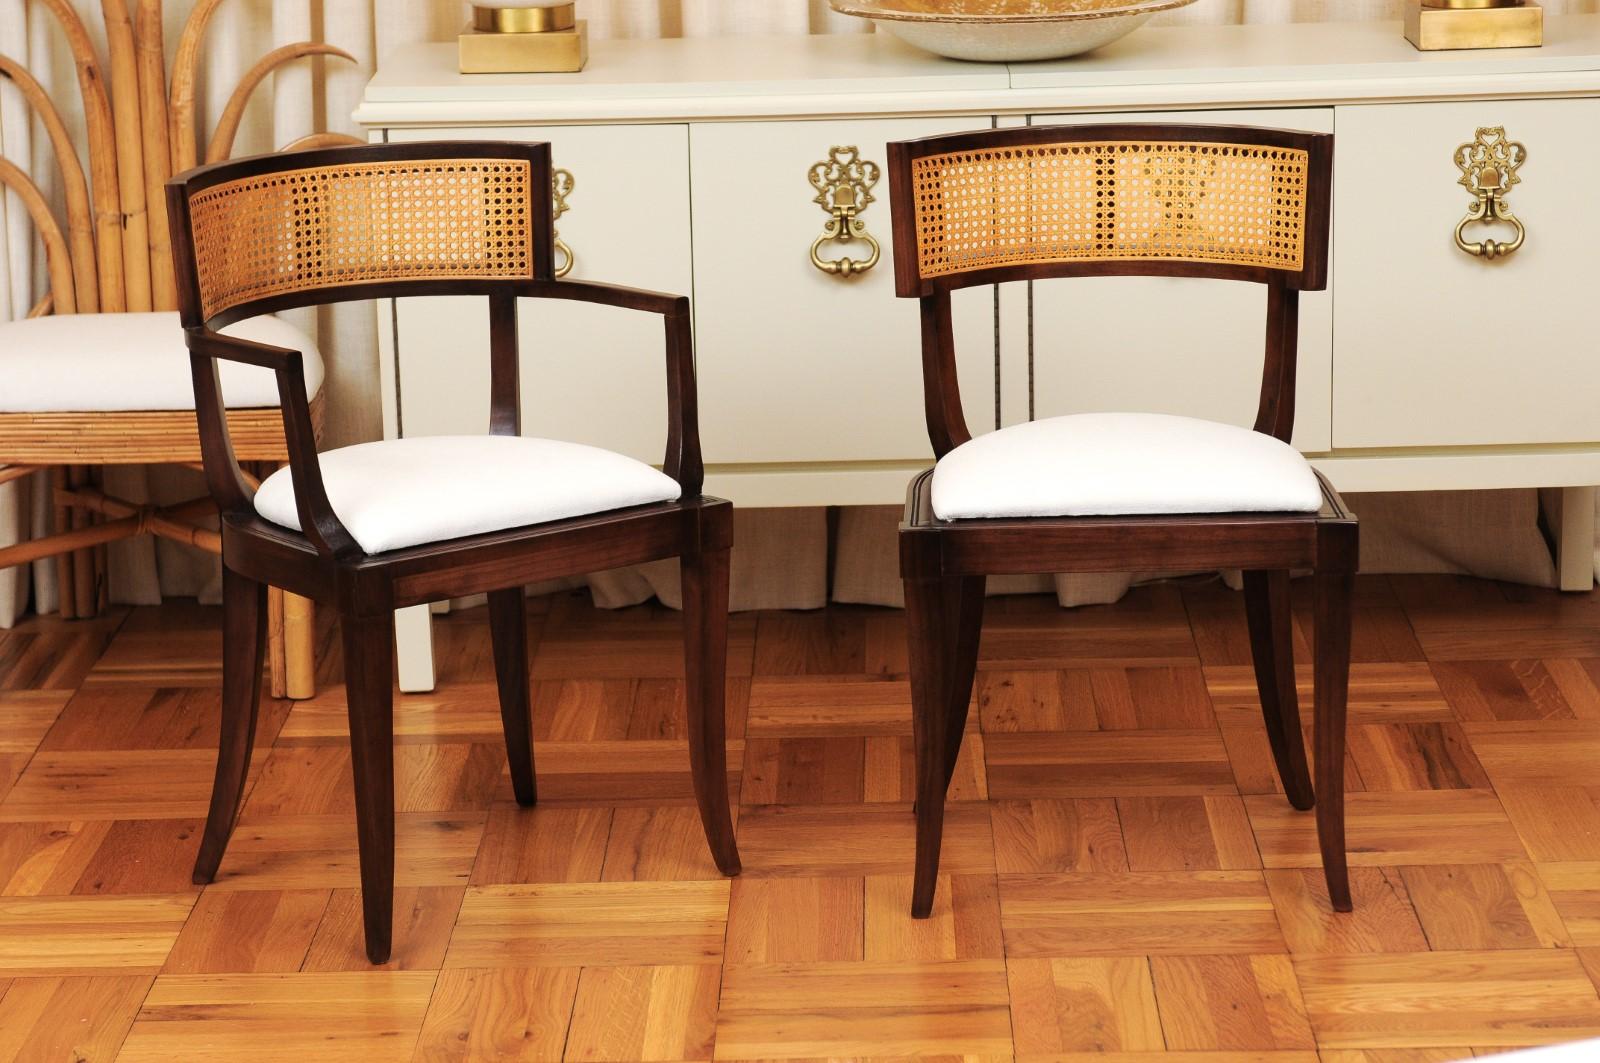 The rarest of the rare: An exceptional, meticulously restored set of ten (10) cane back Klismos dining chairs by Baker Furniture, circa 1958. A set of this magnitude is the Collector's equivalent to capturing a Purple Unicorn. This design is